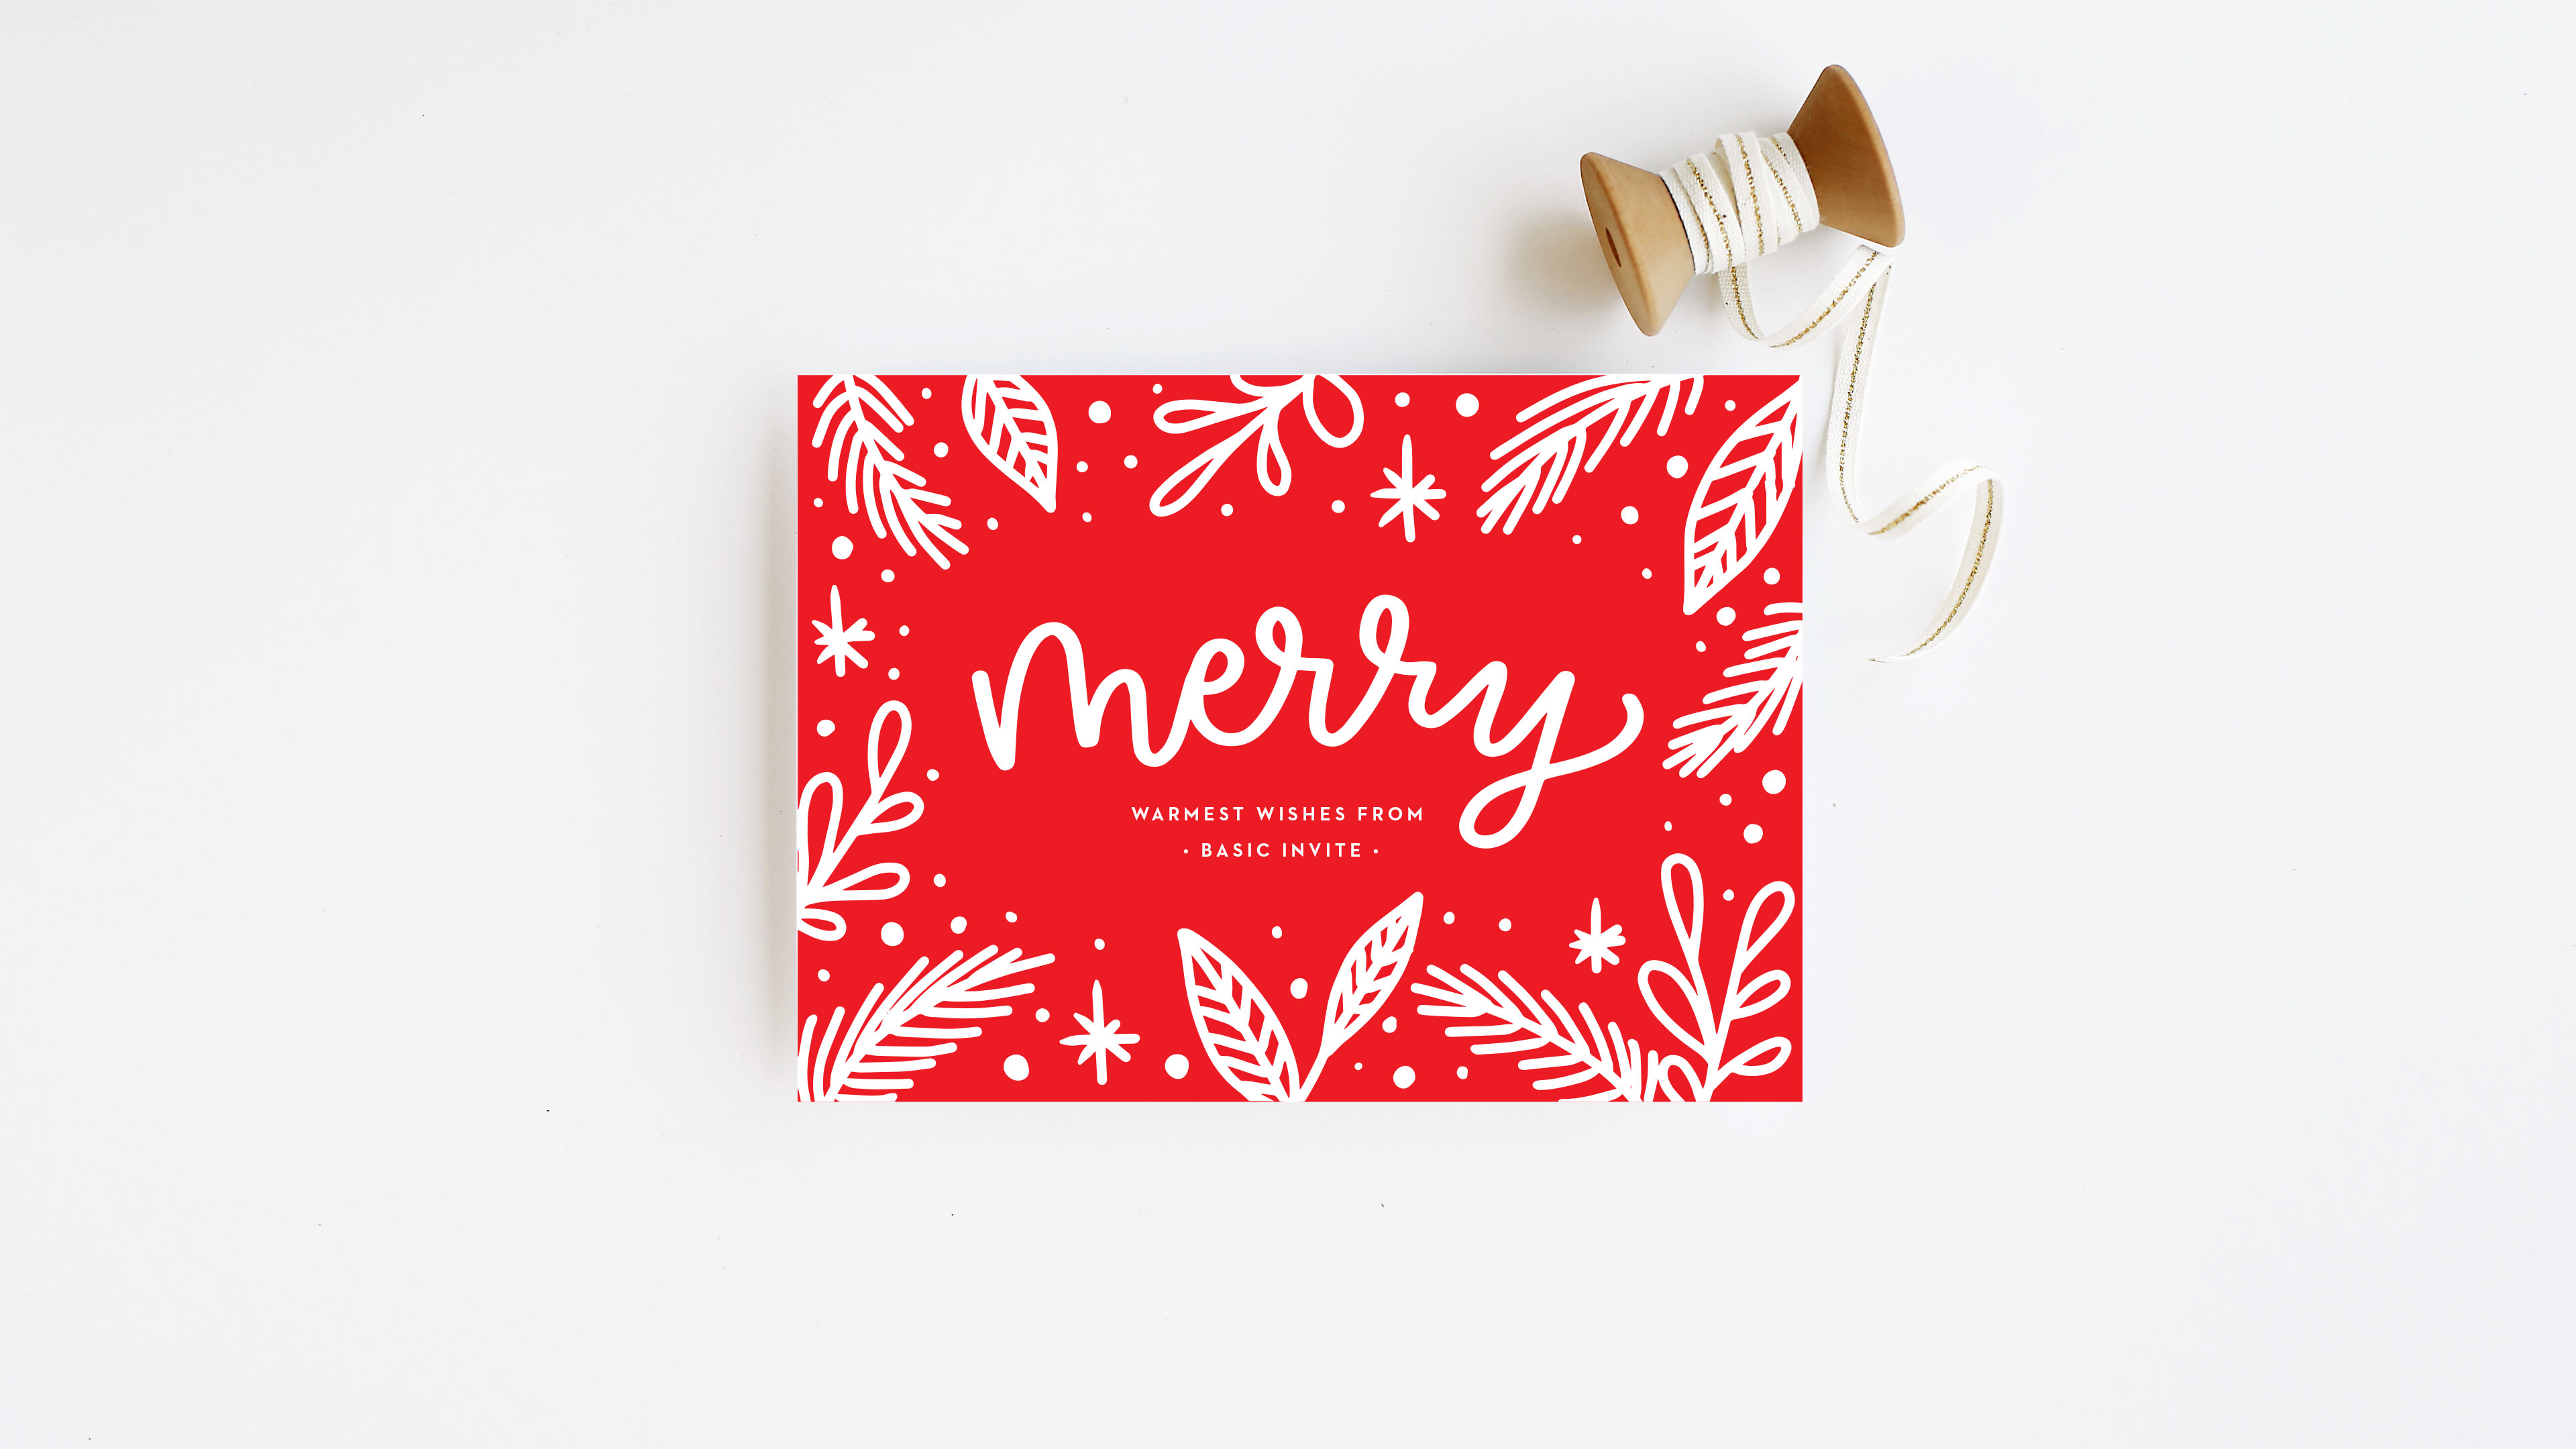 If you love to spread holiday cheer, there's no easier way to do so than with Christmas cards. And it doesn’t have to be overwhelming or time consuming. Here are a few fun ways to make your Christmas card experience faster, easier and fun.